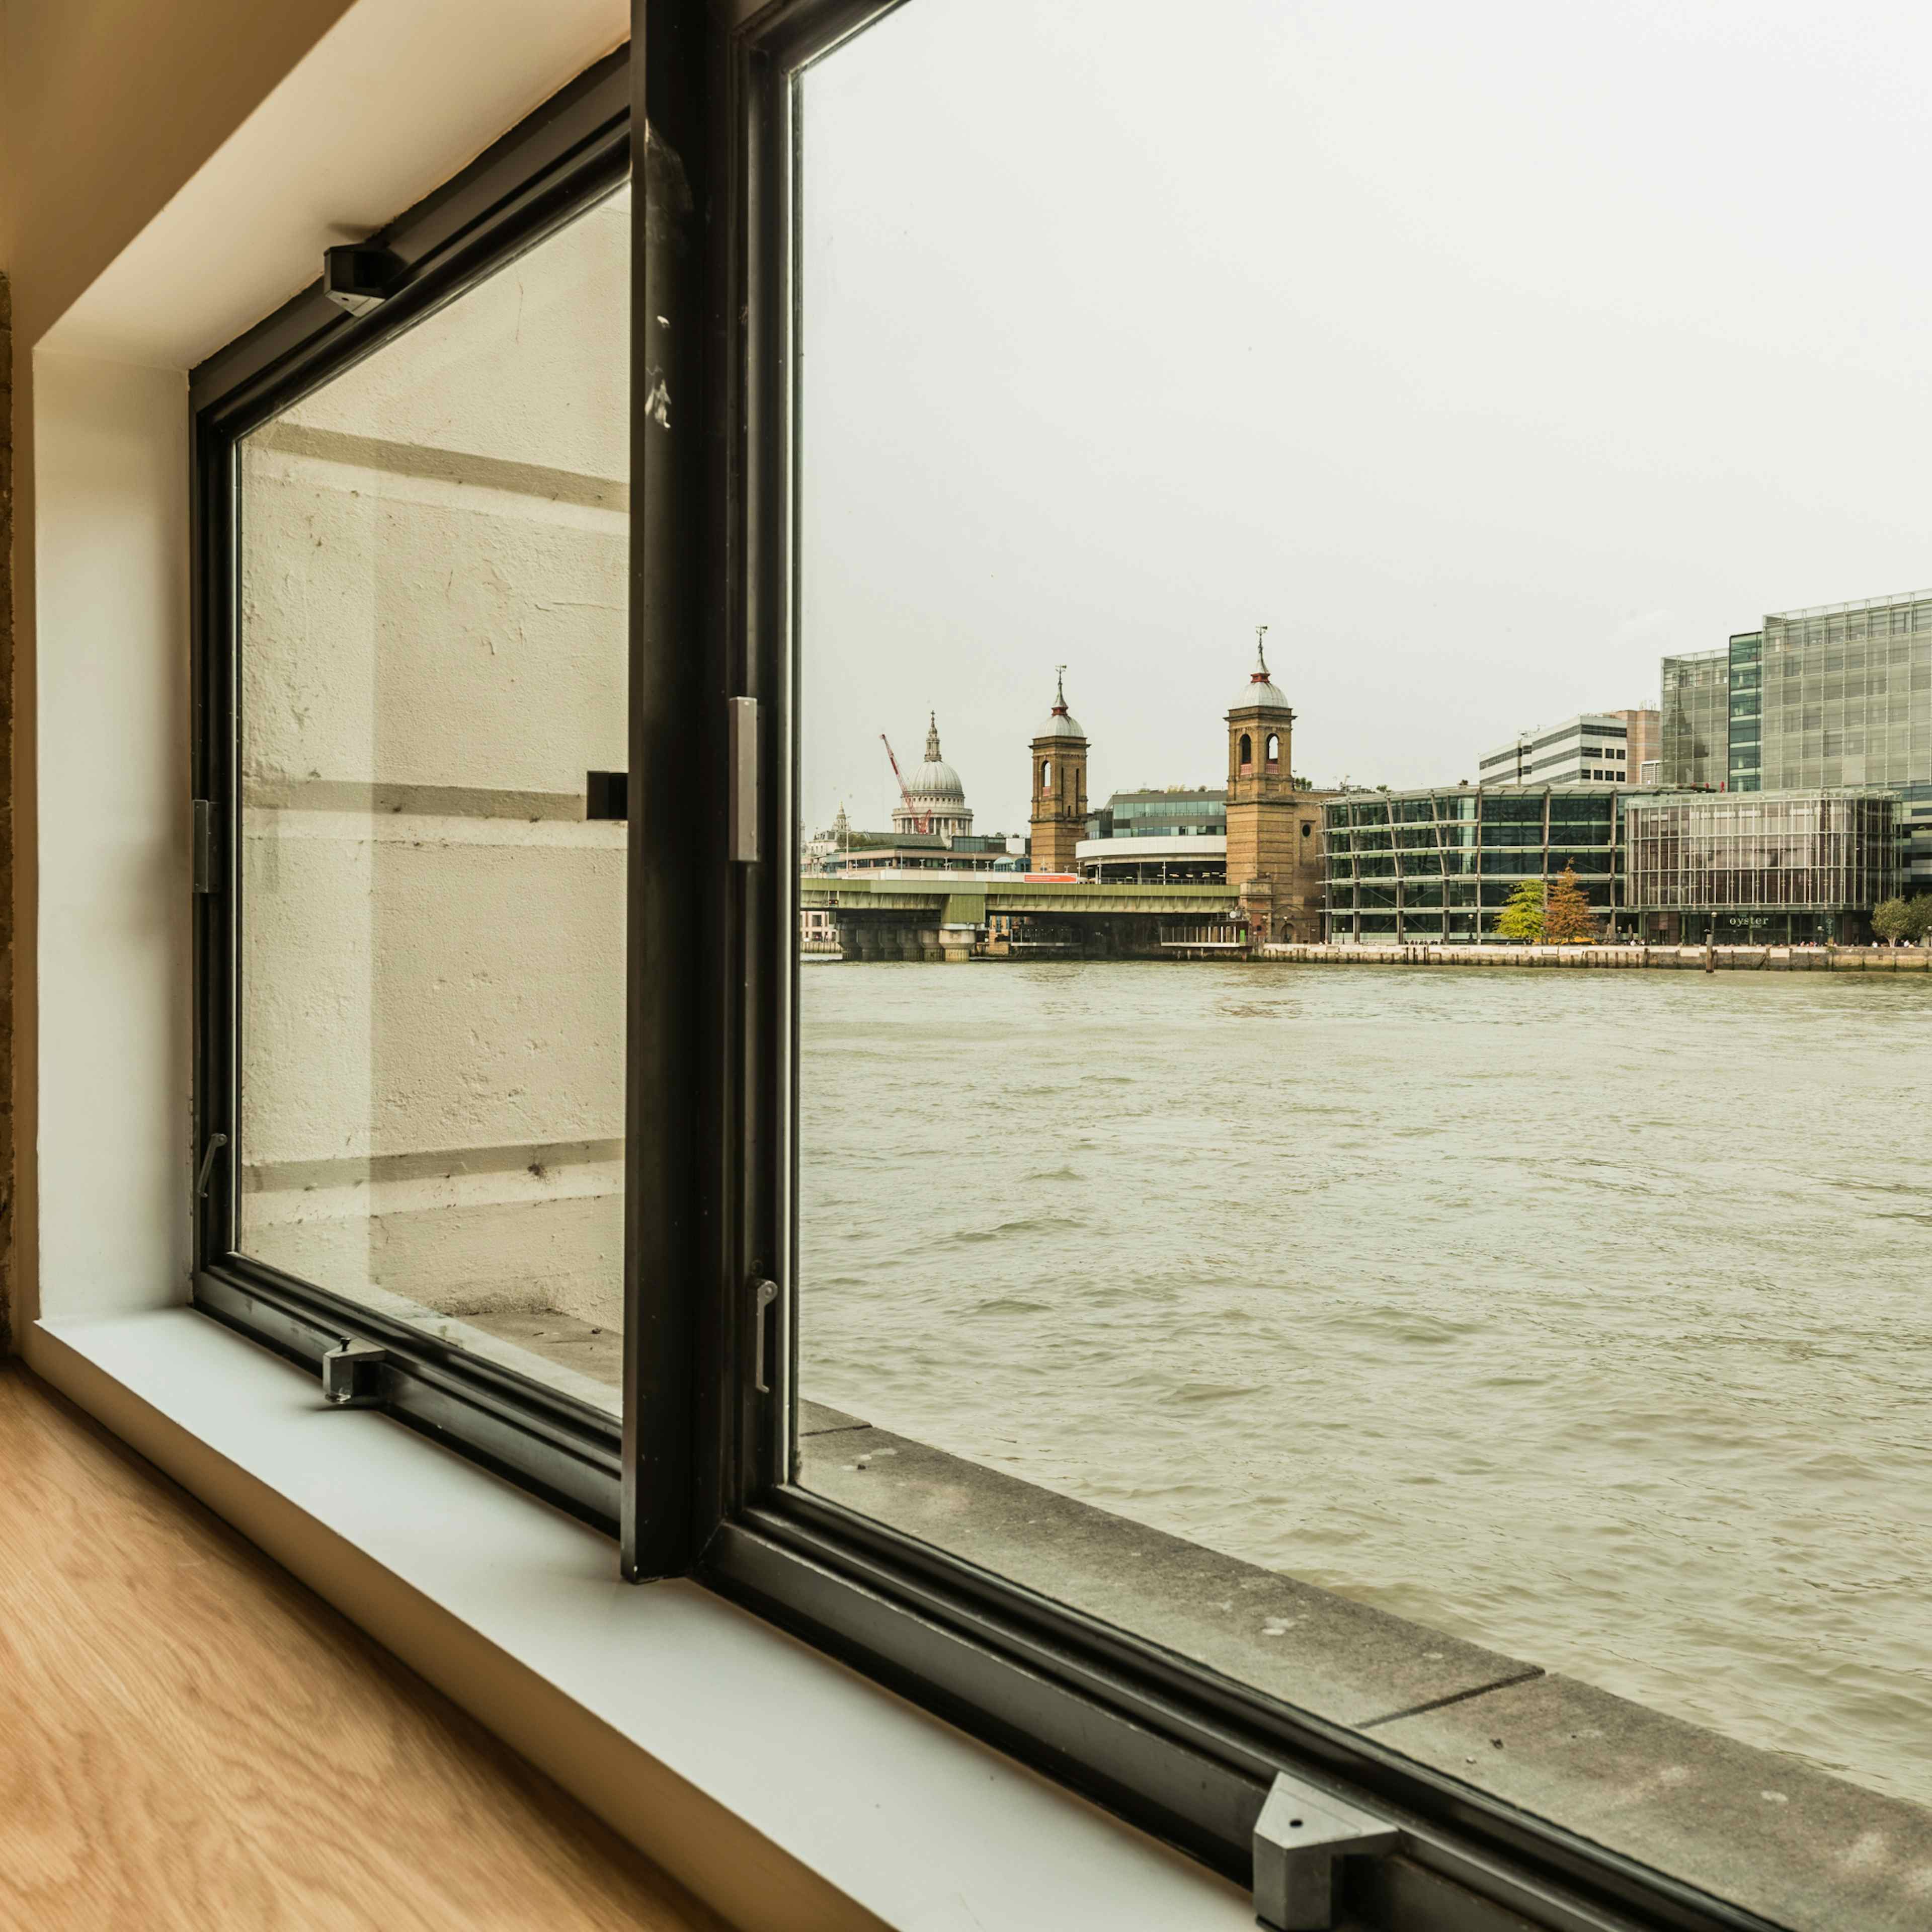 Glaziers Hall - The Thames Room image 2